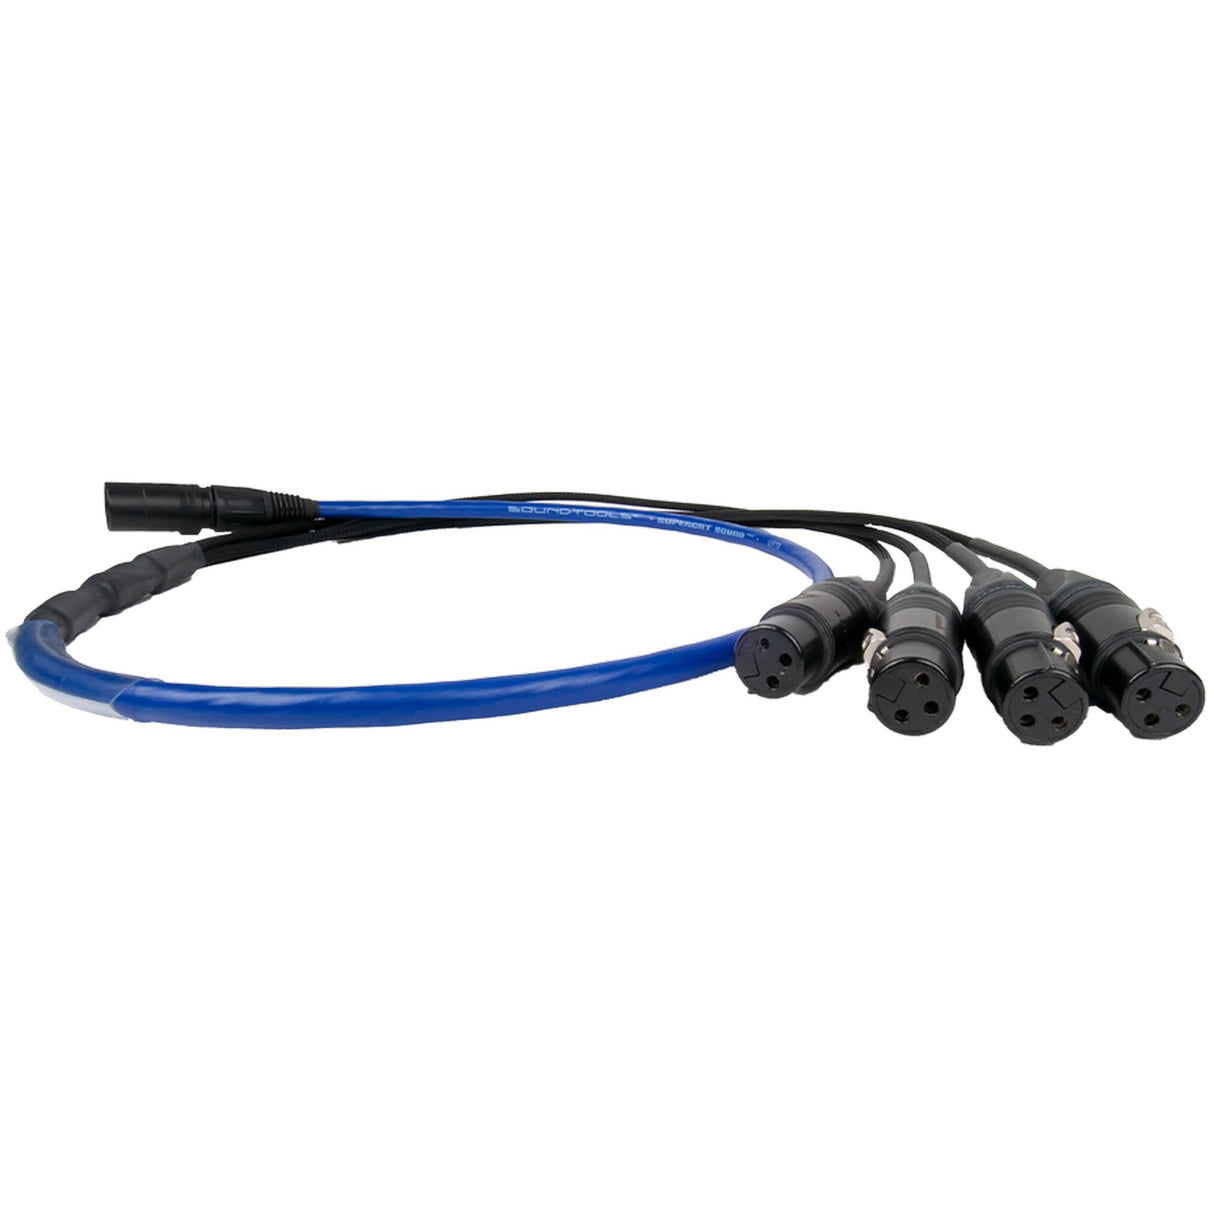 SoundTools SCST-FD-E SuperCAT Sound Tails 4 Female XLR to Female etherCON Snake Cable